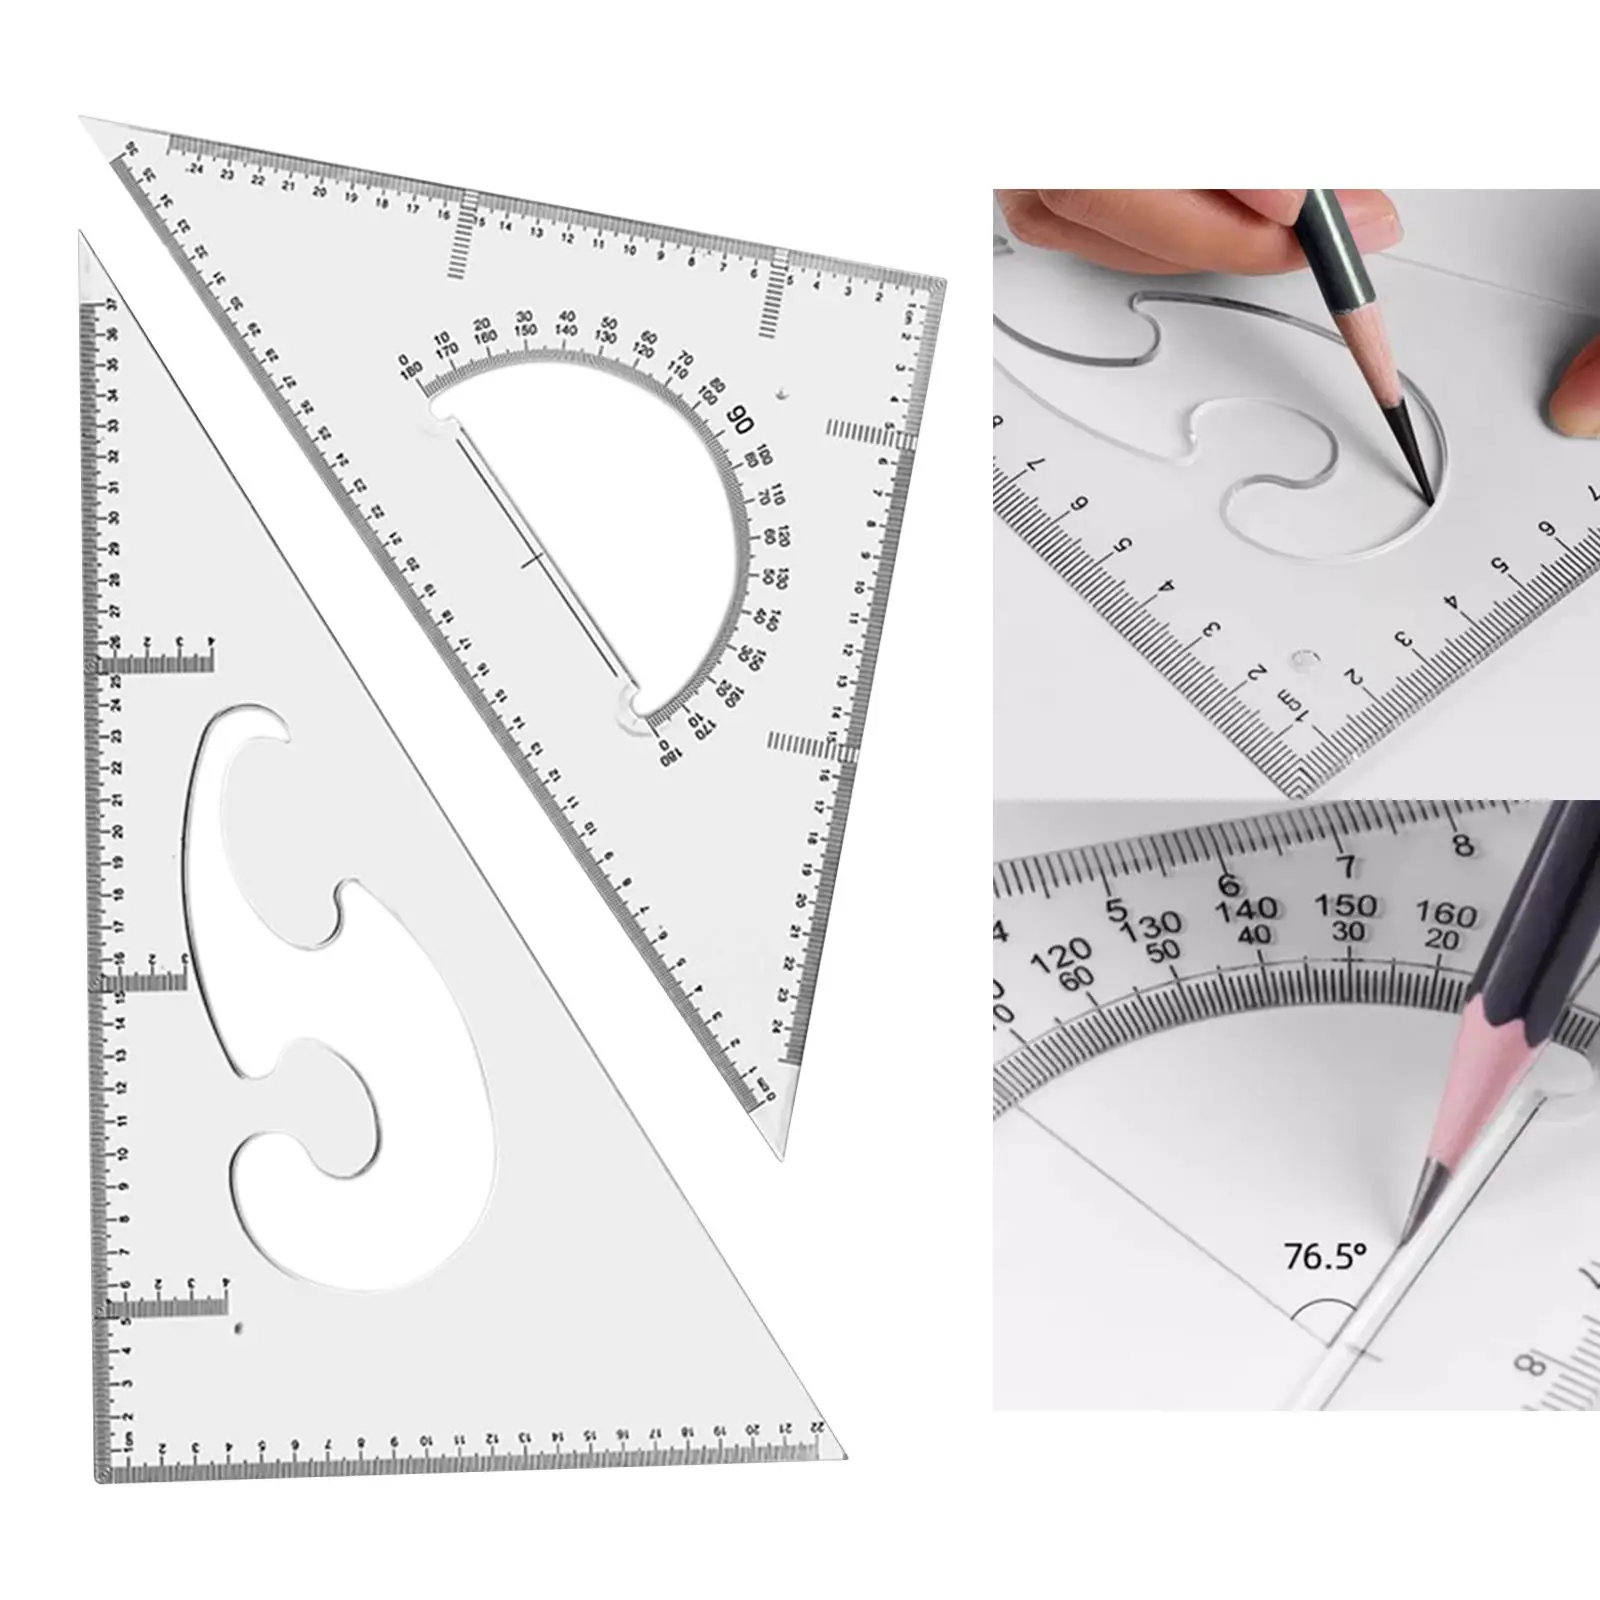 2x Triangle Ruler Square Multipurpose Professional Transparent Measuring Ruler for Carpentry Engineering Artists Design Drafting